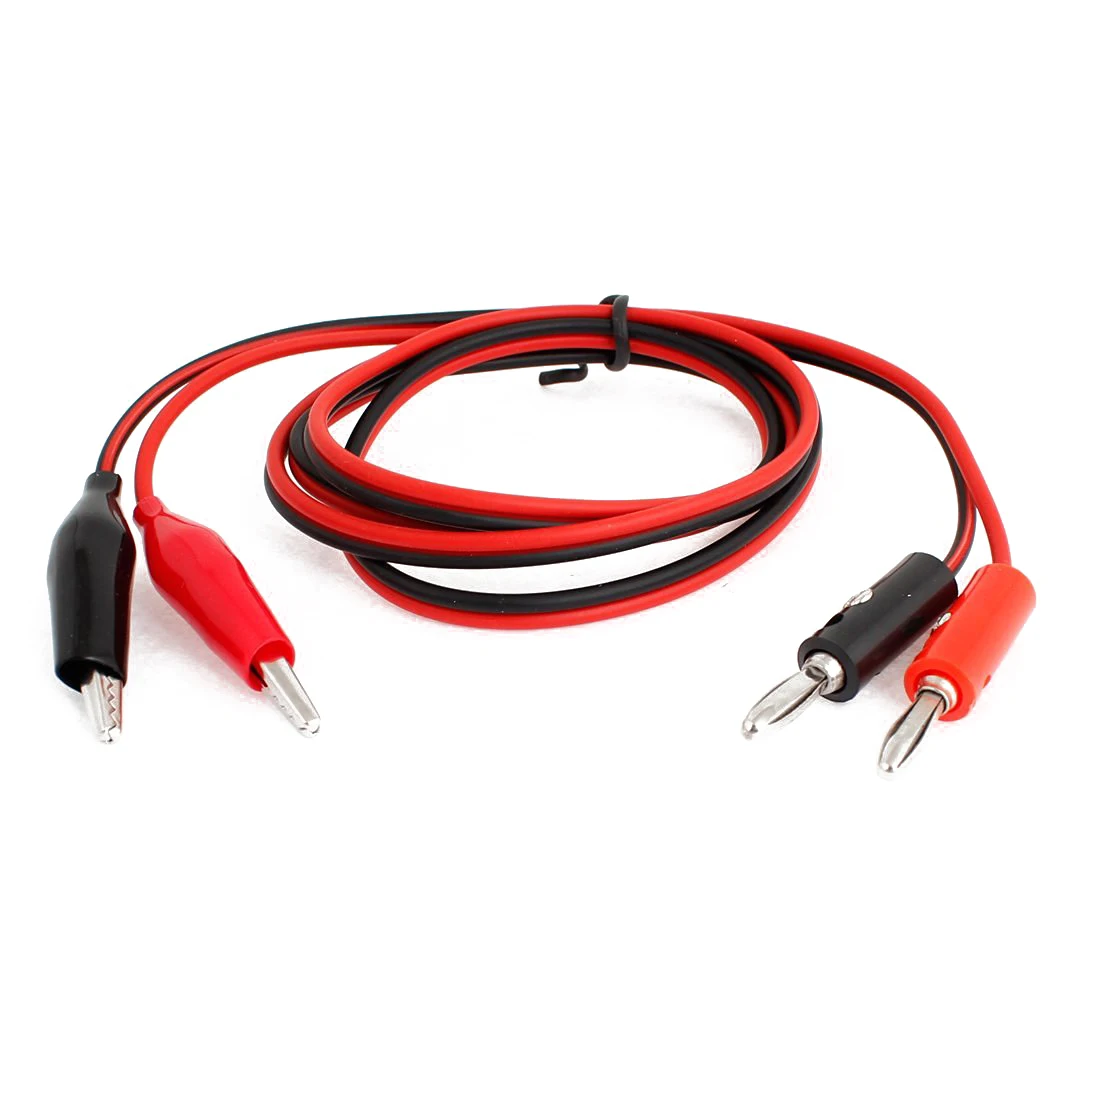 1M 3.2ft Test Leads Set with Alligator Clips Double-ended Jumper Wires 2Pcs 